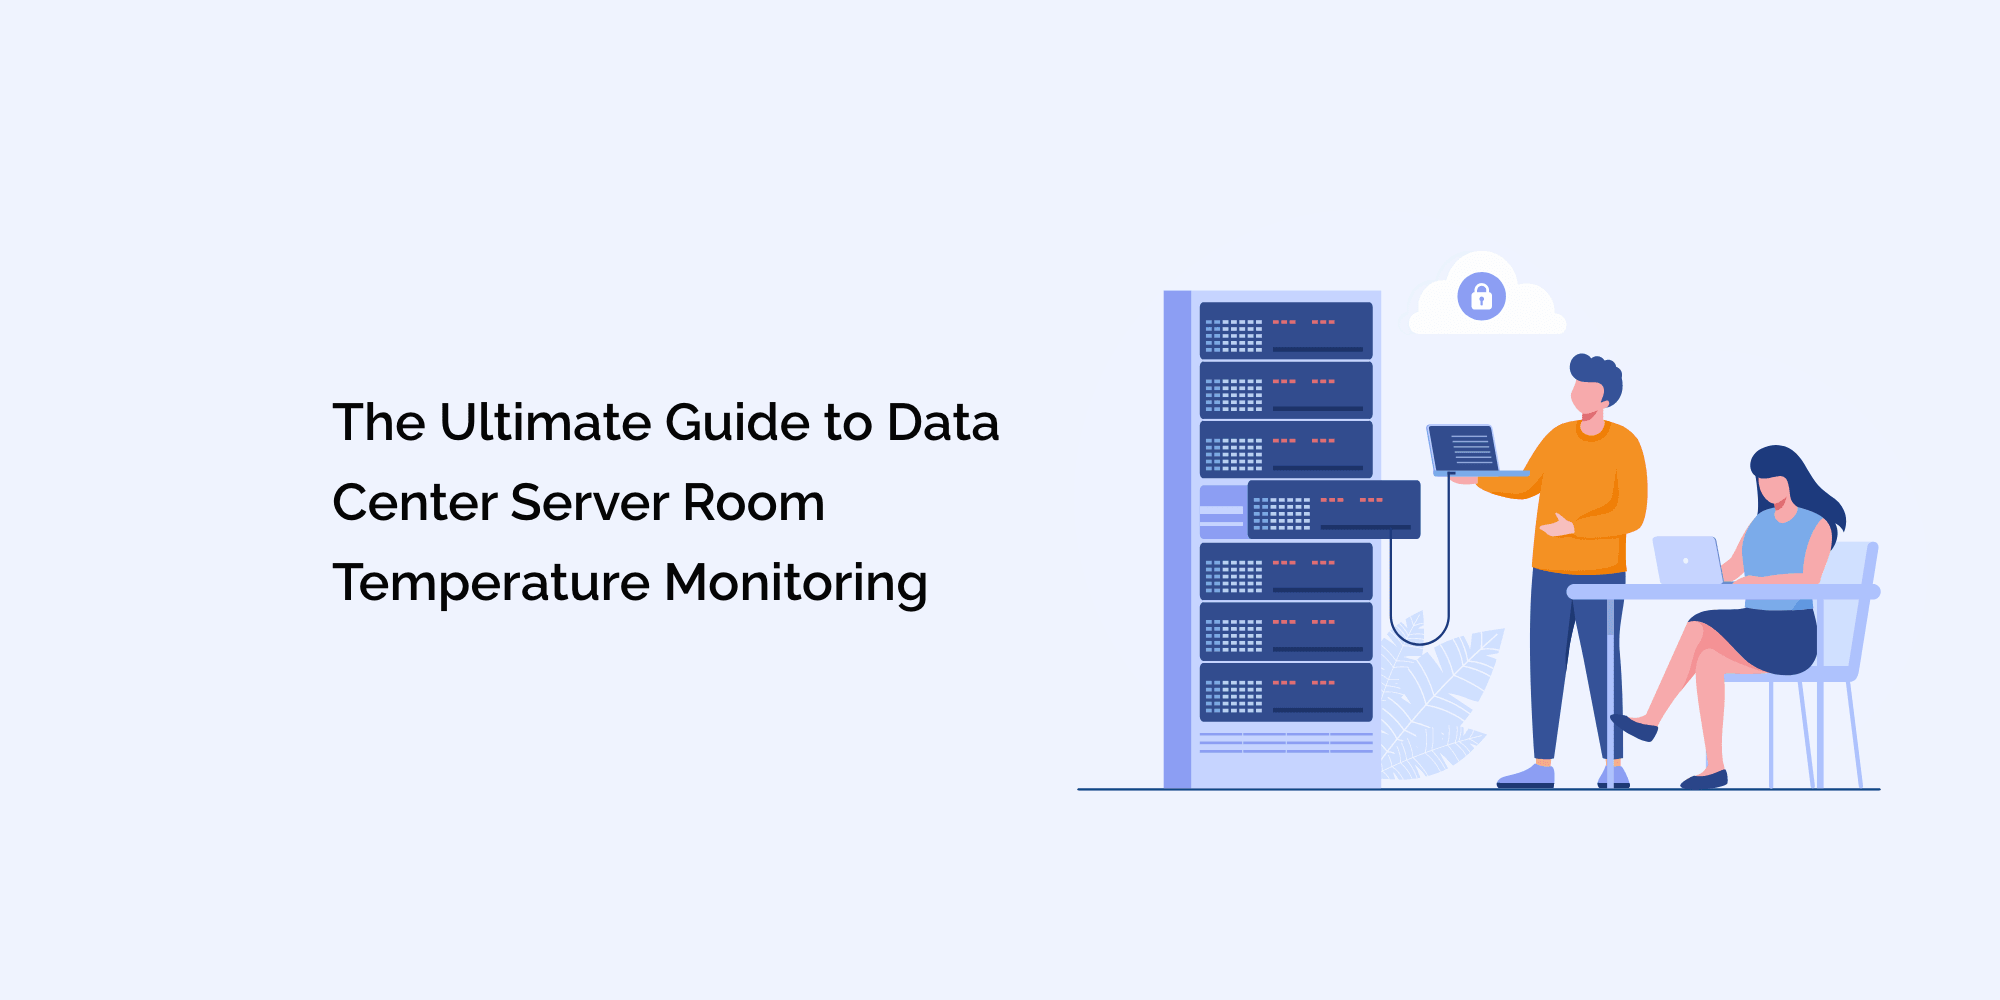 The Ultimate Guide to Data Center Server Room Temperature Monitoring